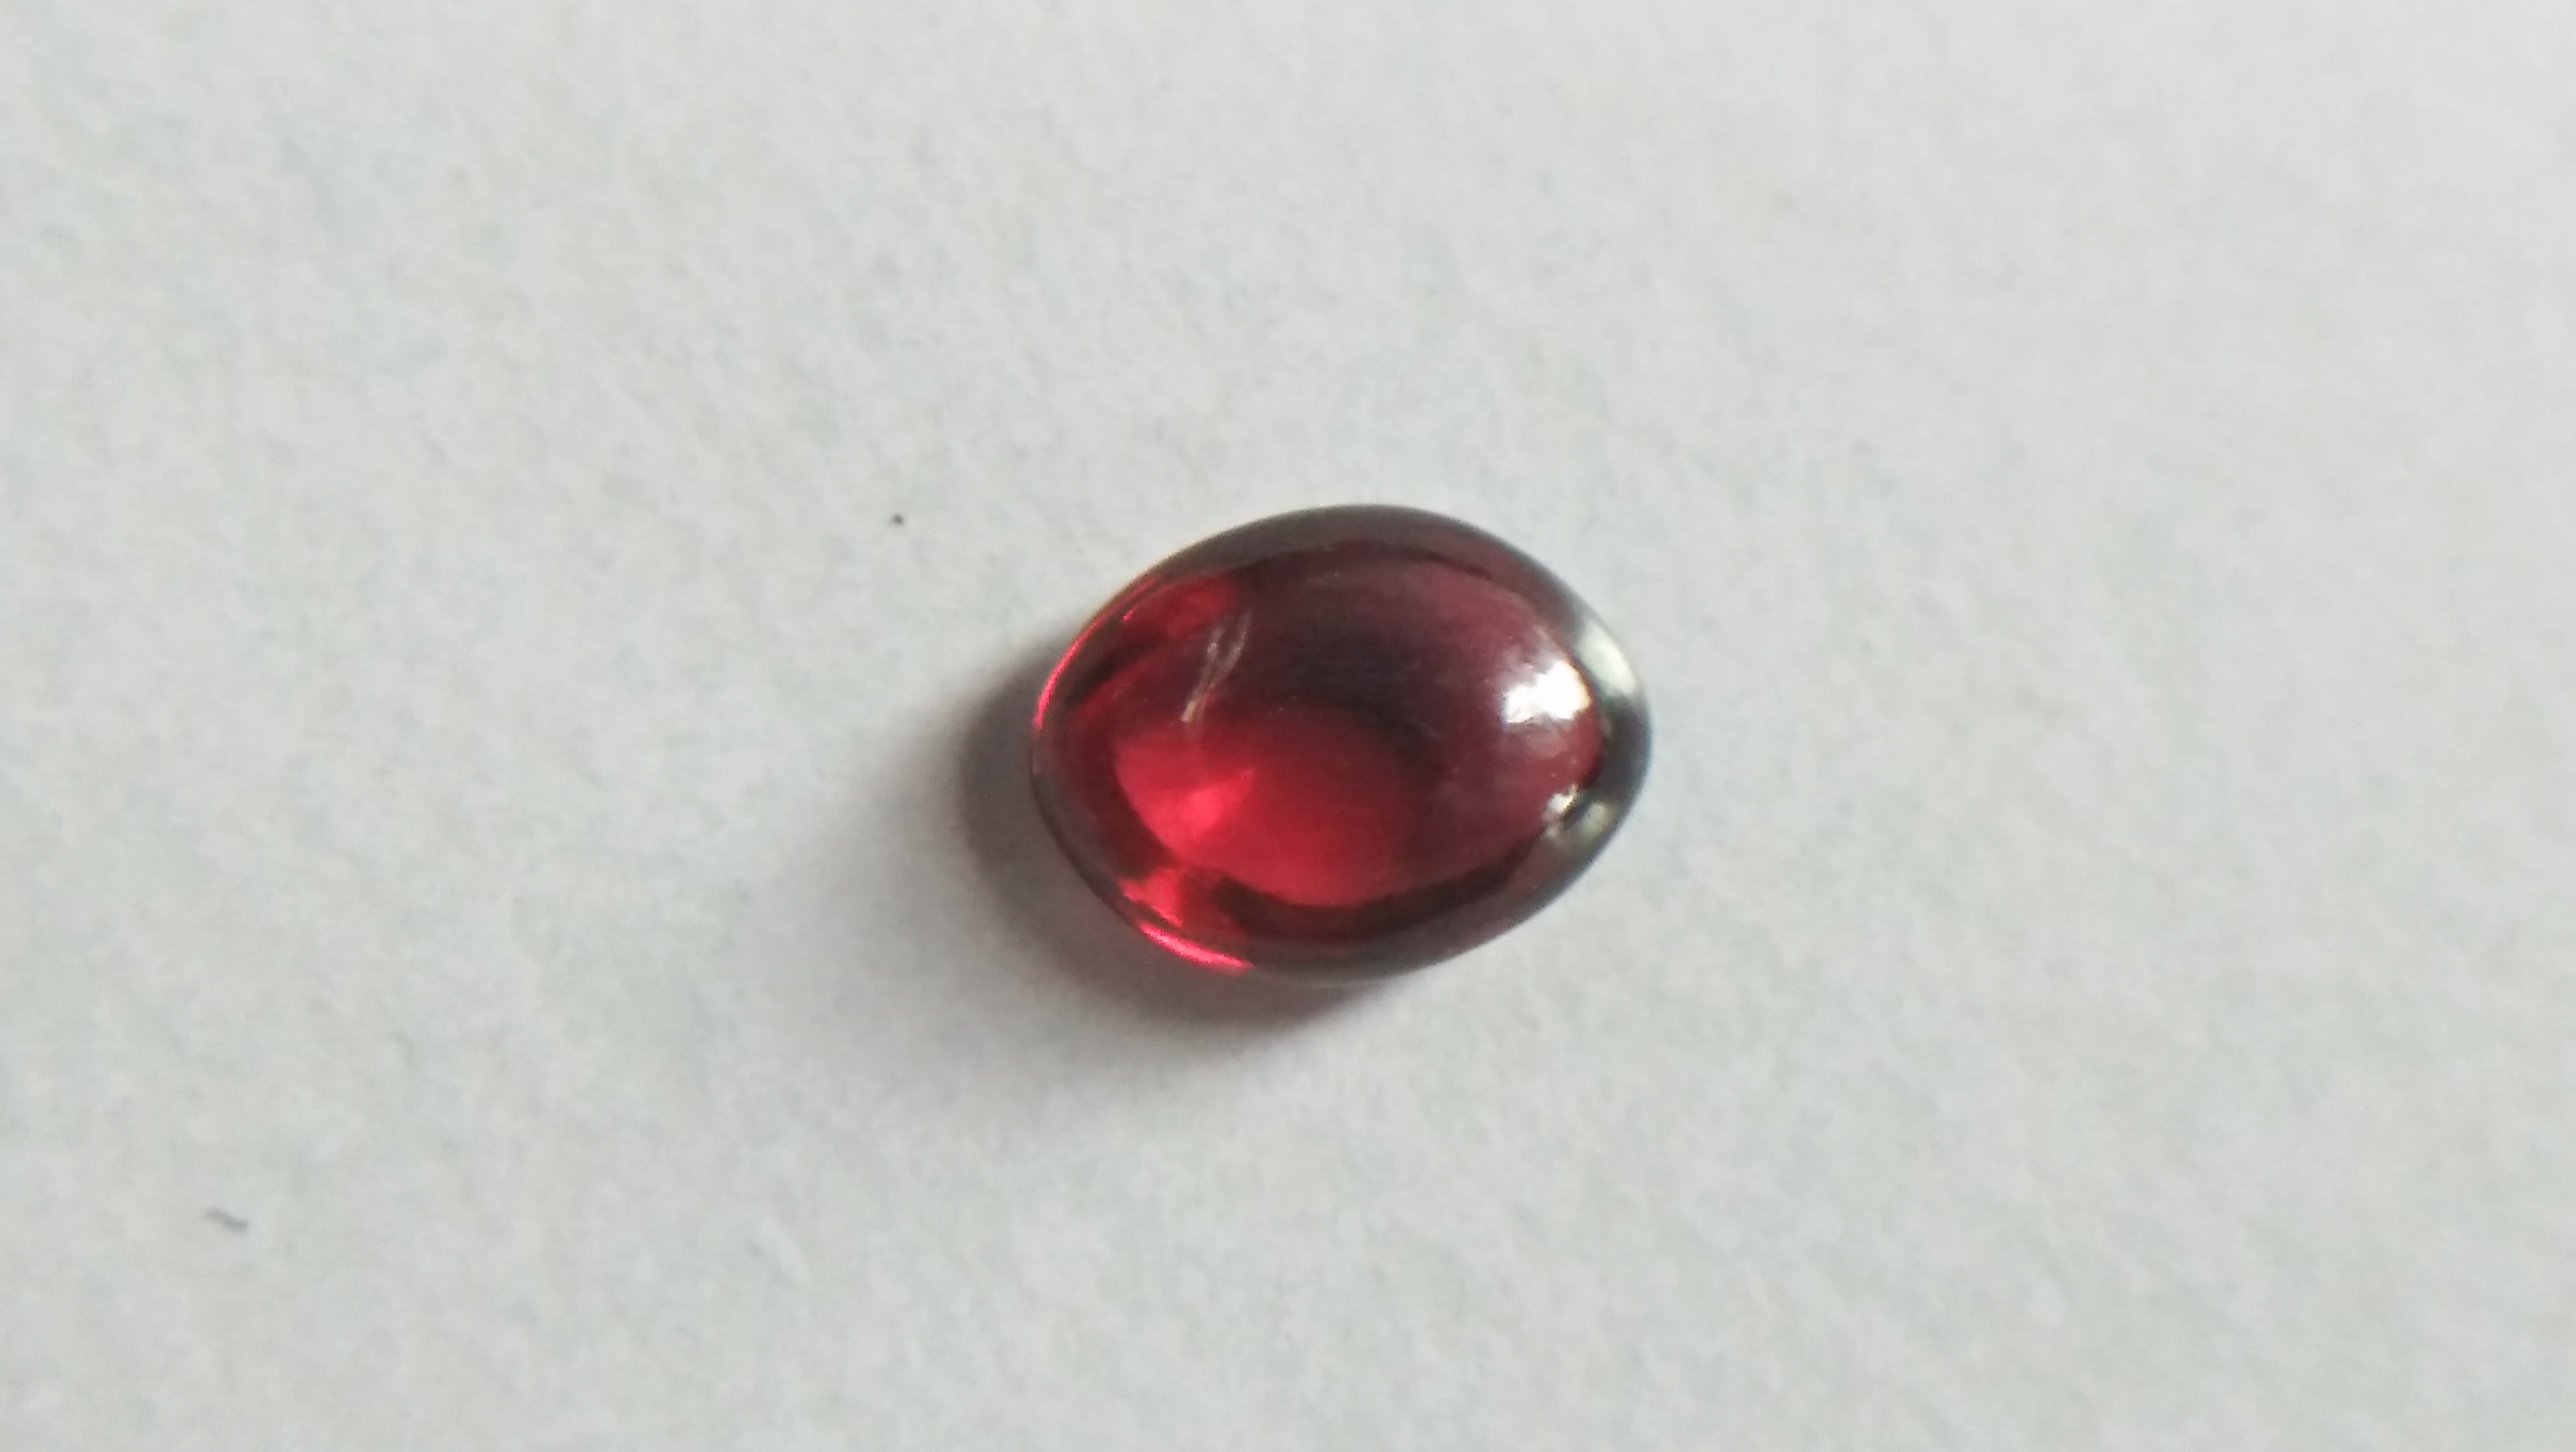 Ceylon Natural Rhodolite Garnet Cabochon Eye 👀 Weight: 2.05Cts Dimension: 9.1mm x 6.9mm x 3.5mm Mineral: Ratapura, Sri Lanka Clarity: Very Clean Colour: Pinkish Red Birthstone: June birthstone Rhodolite is a varietal name for rose-pink to red mineral pyrope, a species in the garnet group Mohs scale hardness: 7–7.5 Refractive index: 1.760